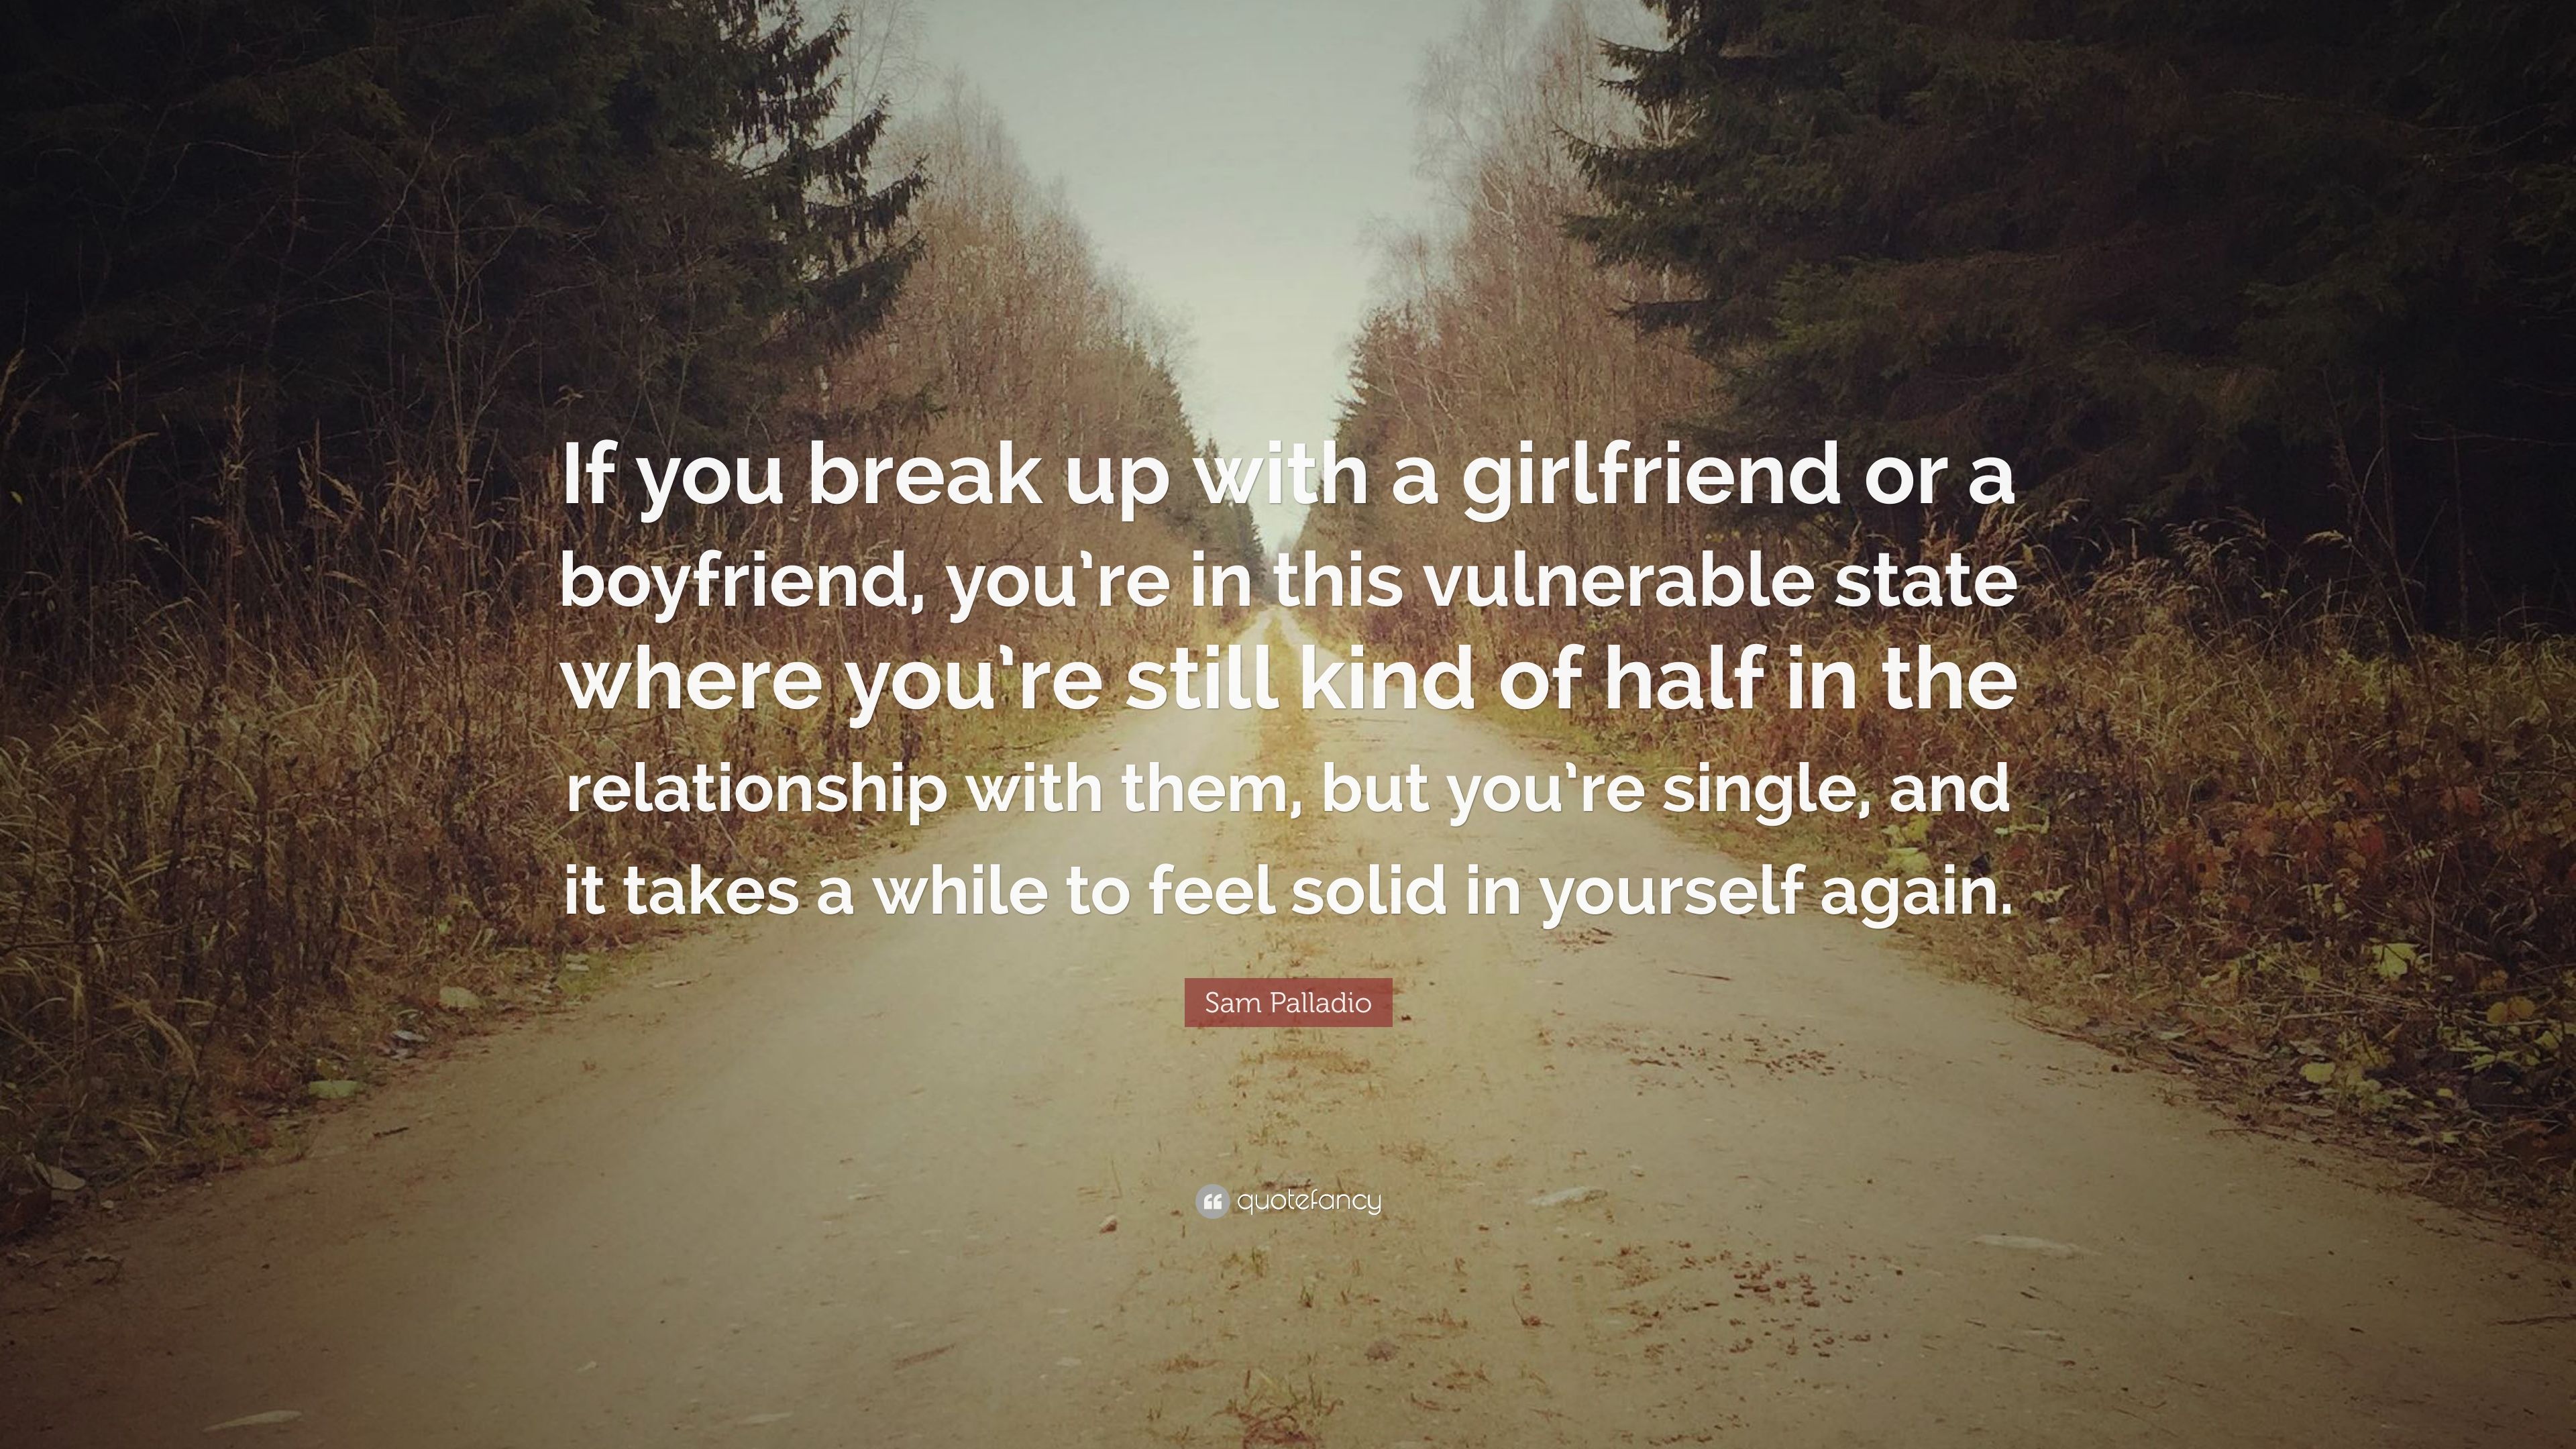 Sam Palladio Quote: “If you break up with a girlfriend or a boyfriend, you're in this vulnerable state where you're still kind of half in the.” (7 wallpaper)